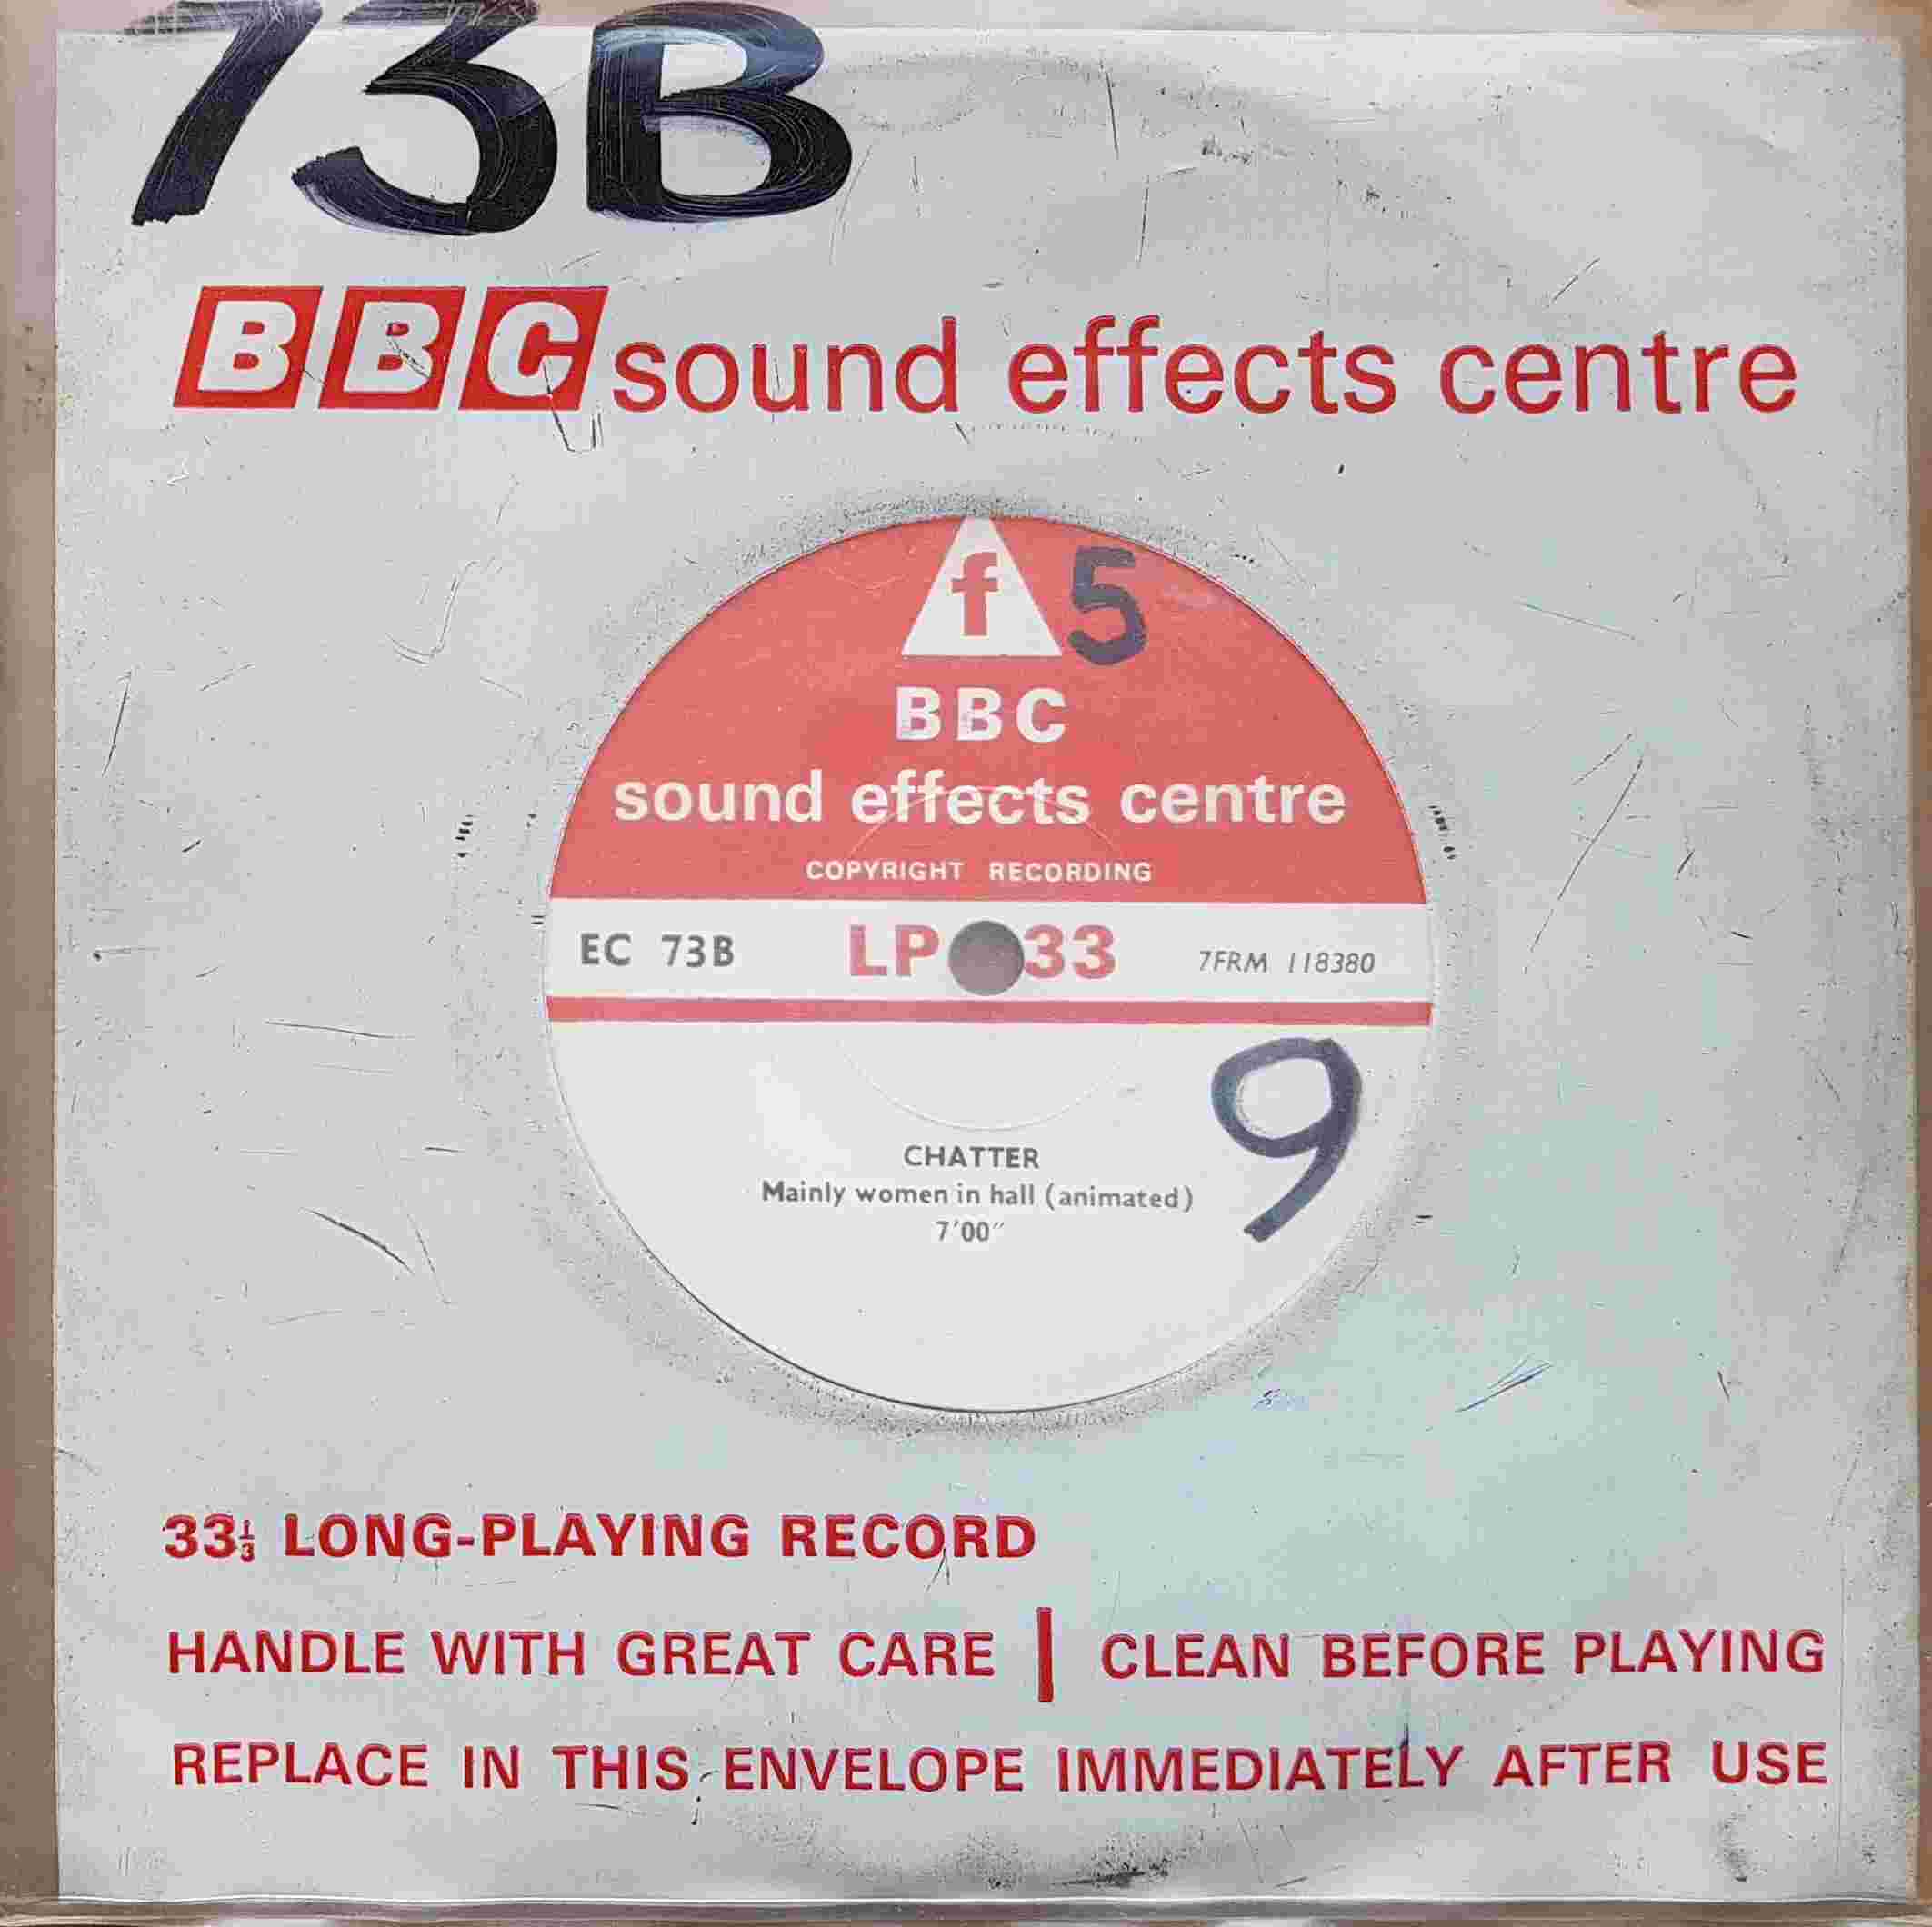 Picture of EC 73B Chatter by artist Not registered from the BBC records and Tapes library